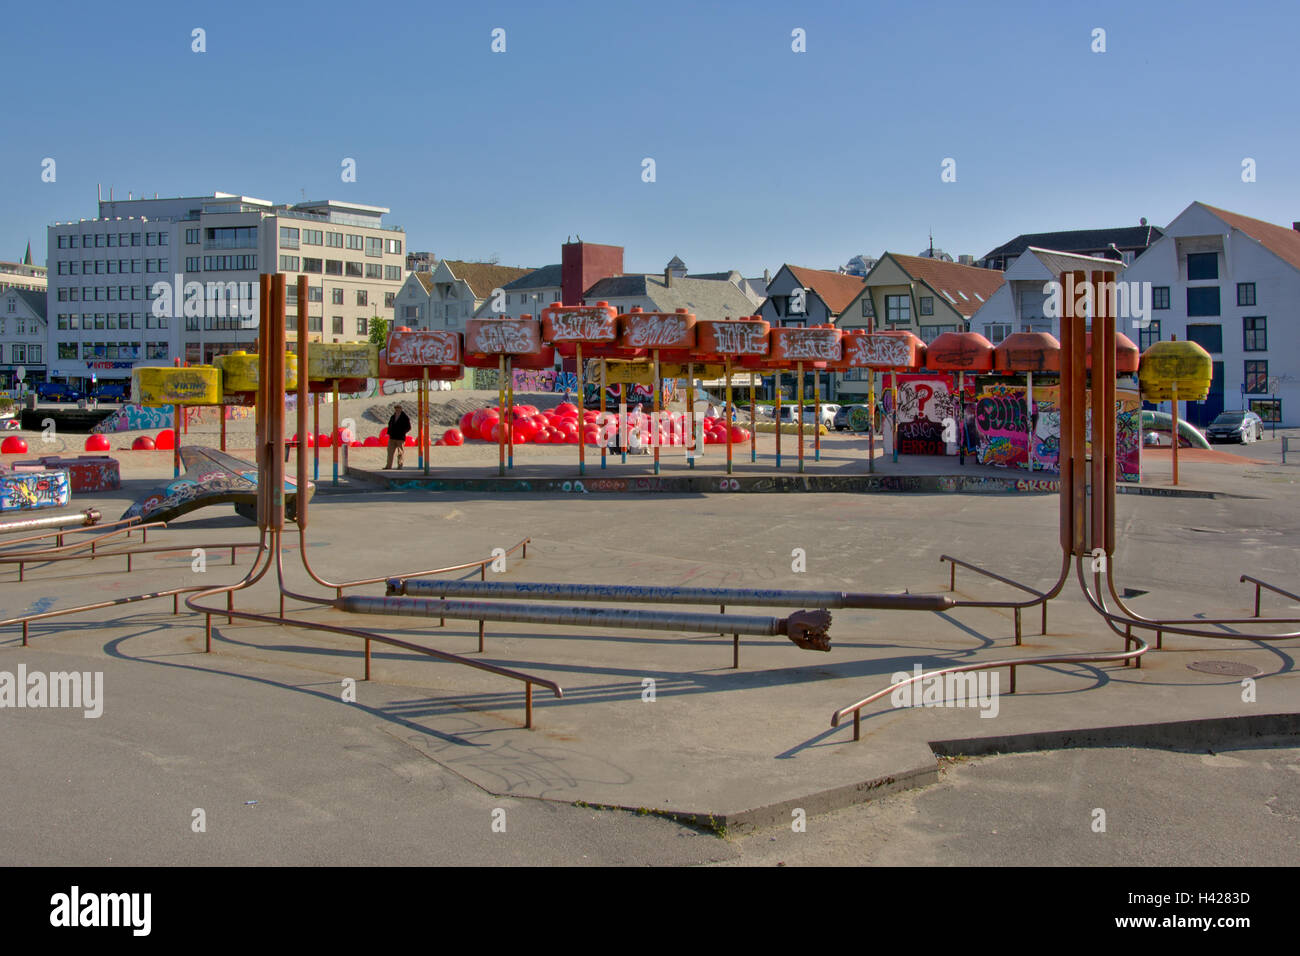 Geopark, a colourful urban playground constructed from recycled materials from oil industry next to the oil museum in Stavanger Stock Photo